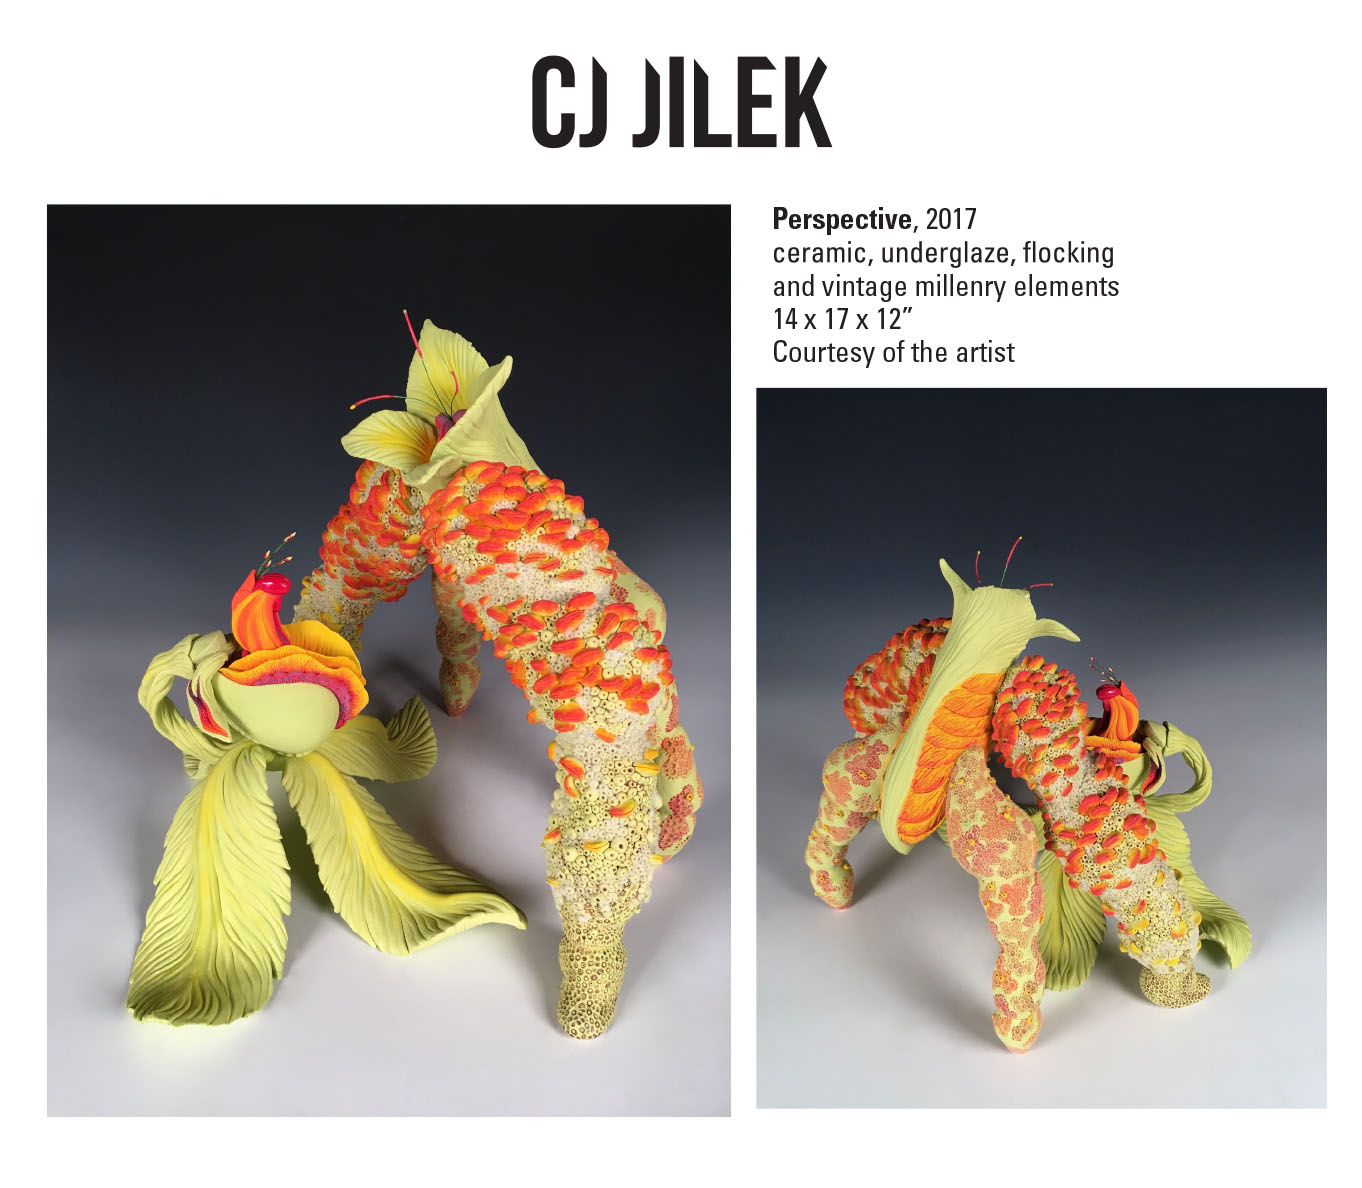 CJ Jilek, Perspective, 2017 ceramic, underglaze, flocking and vintage millenry elements. 14 x 17 x 12” Courtesy of the artist. A sculpture of a plant-like organism with orange and green textures